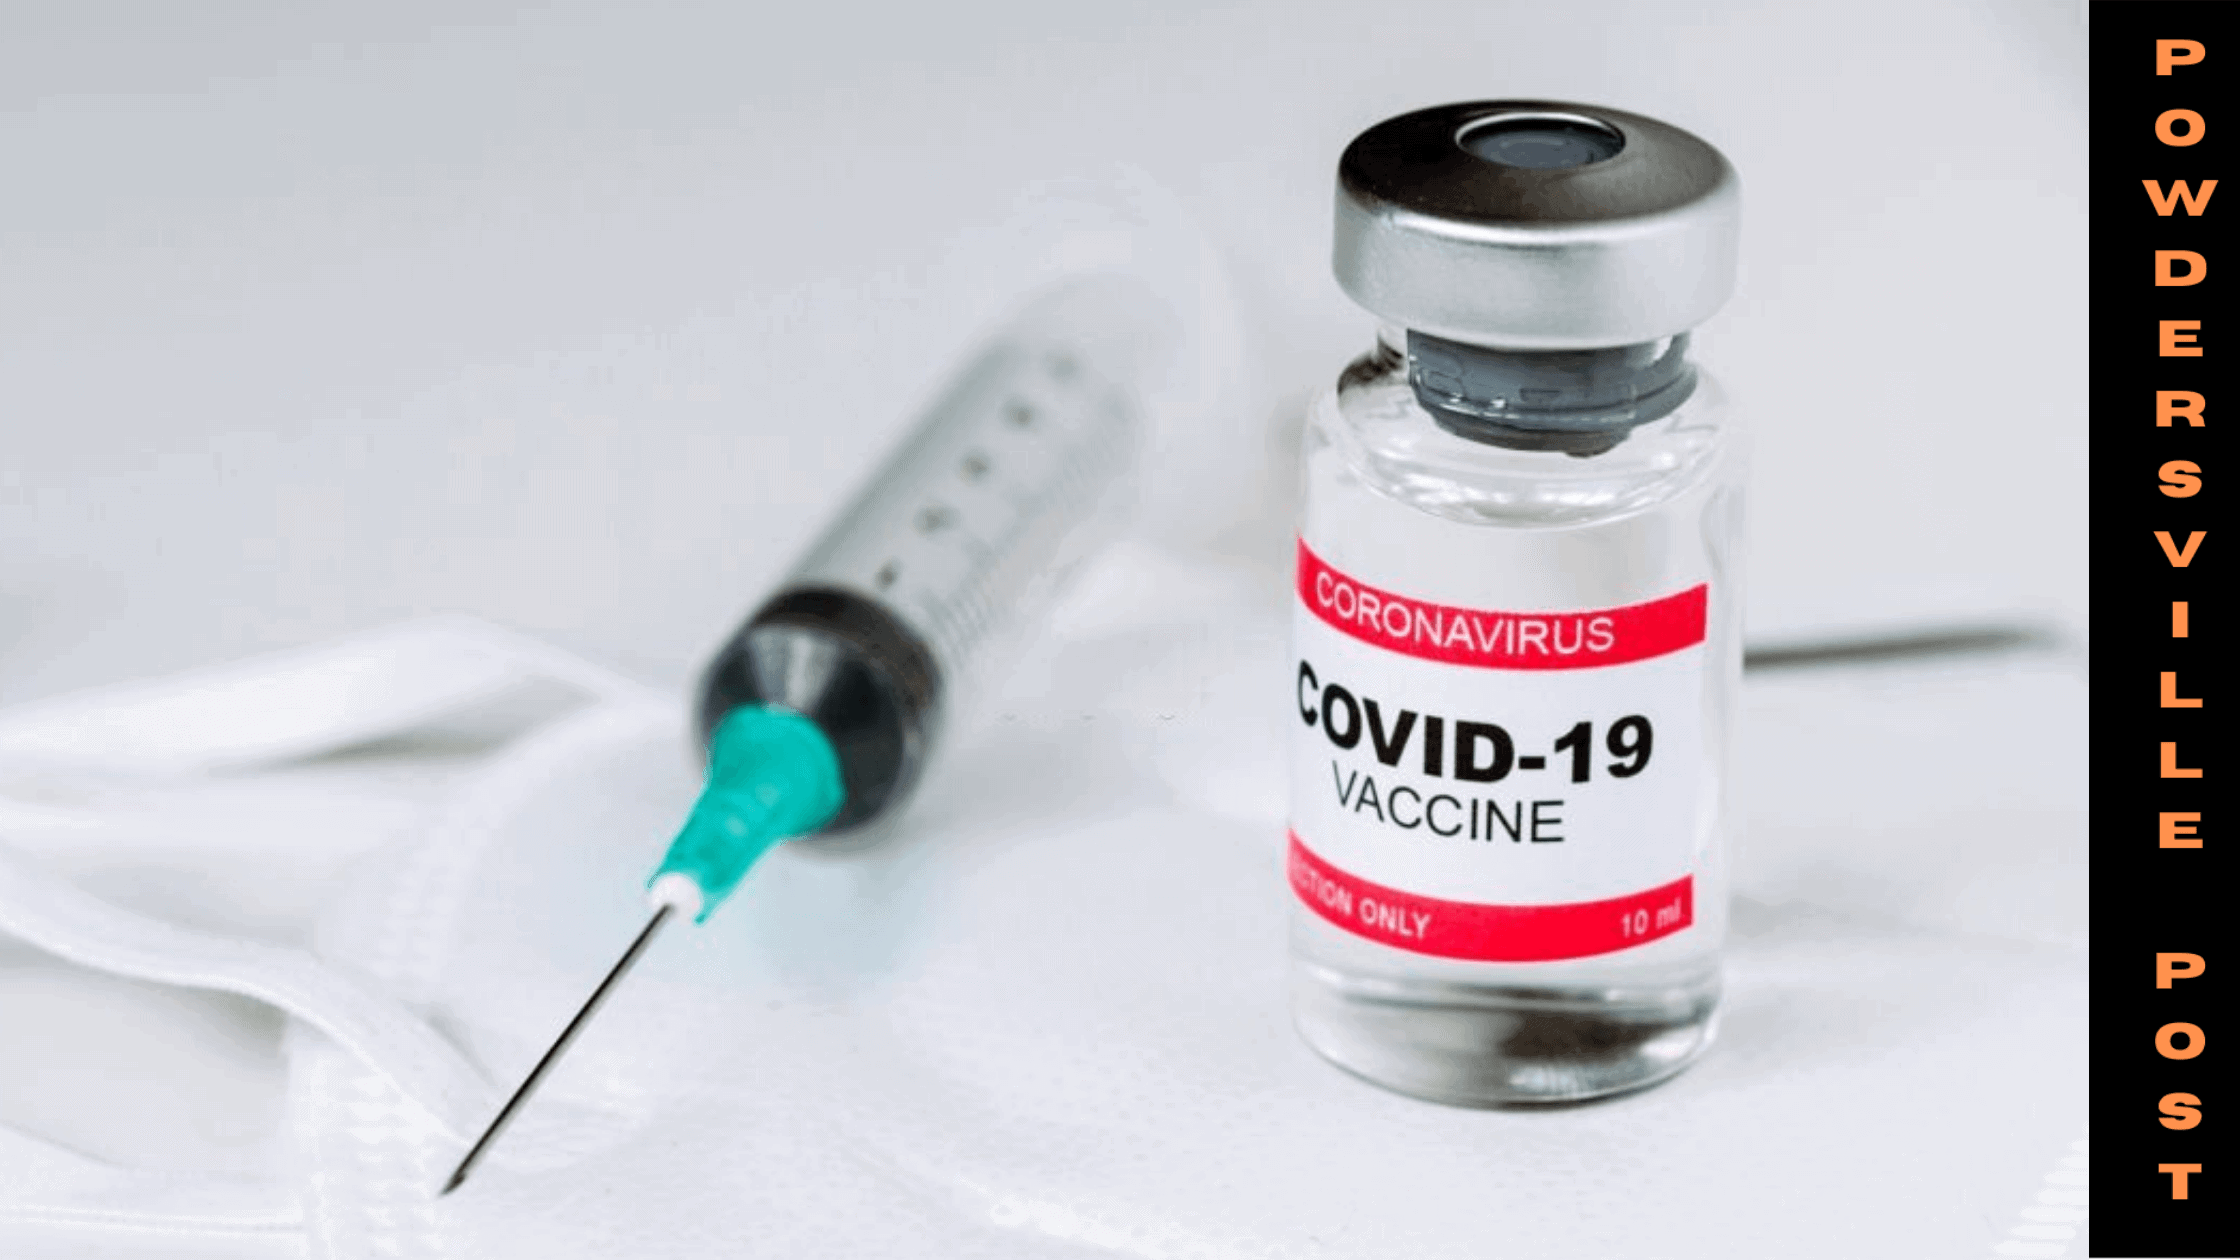 World’s First Plant-Based Covid-19 Vaccine Authorized By Canada